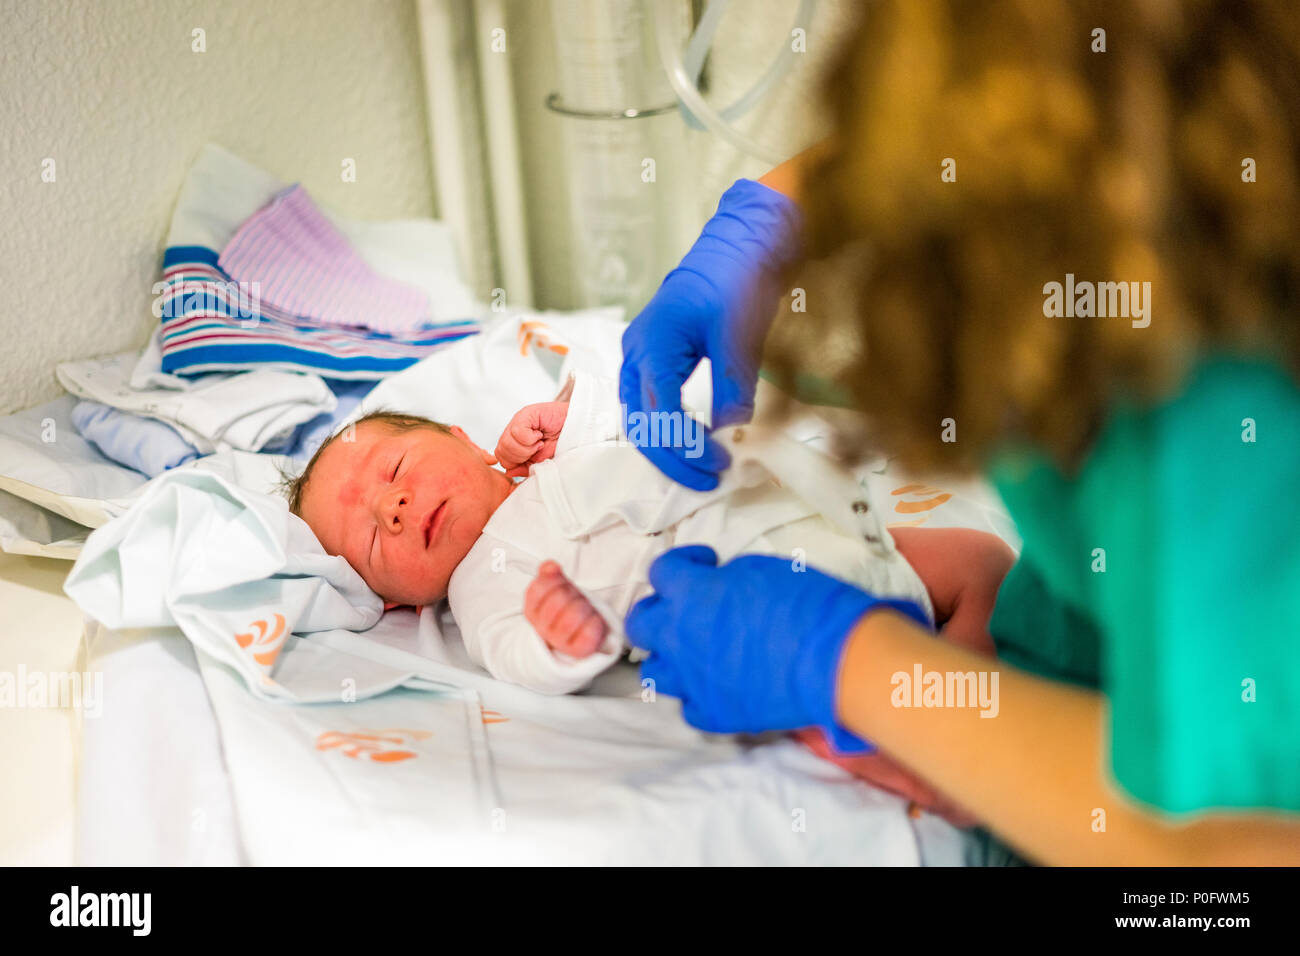 First dressing up of newborn baby boy done by nurse Stock Photo